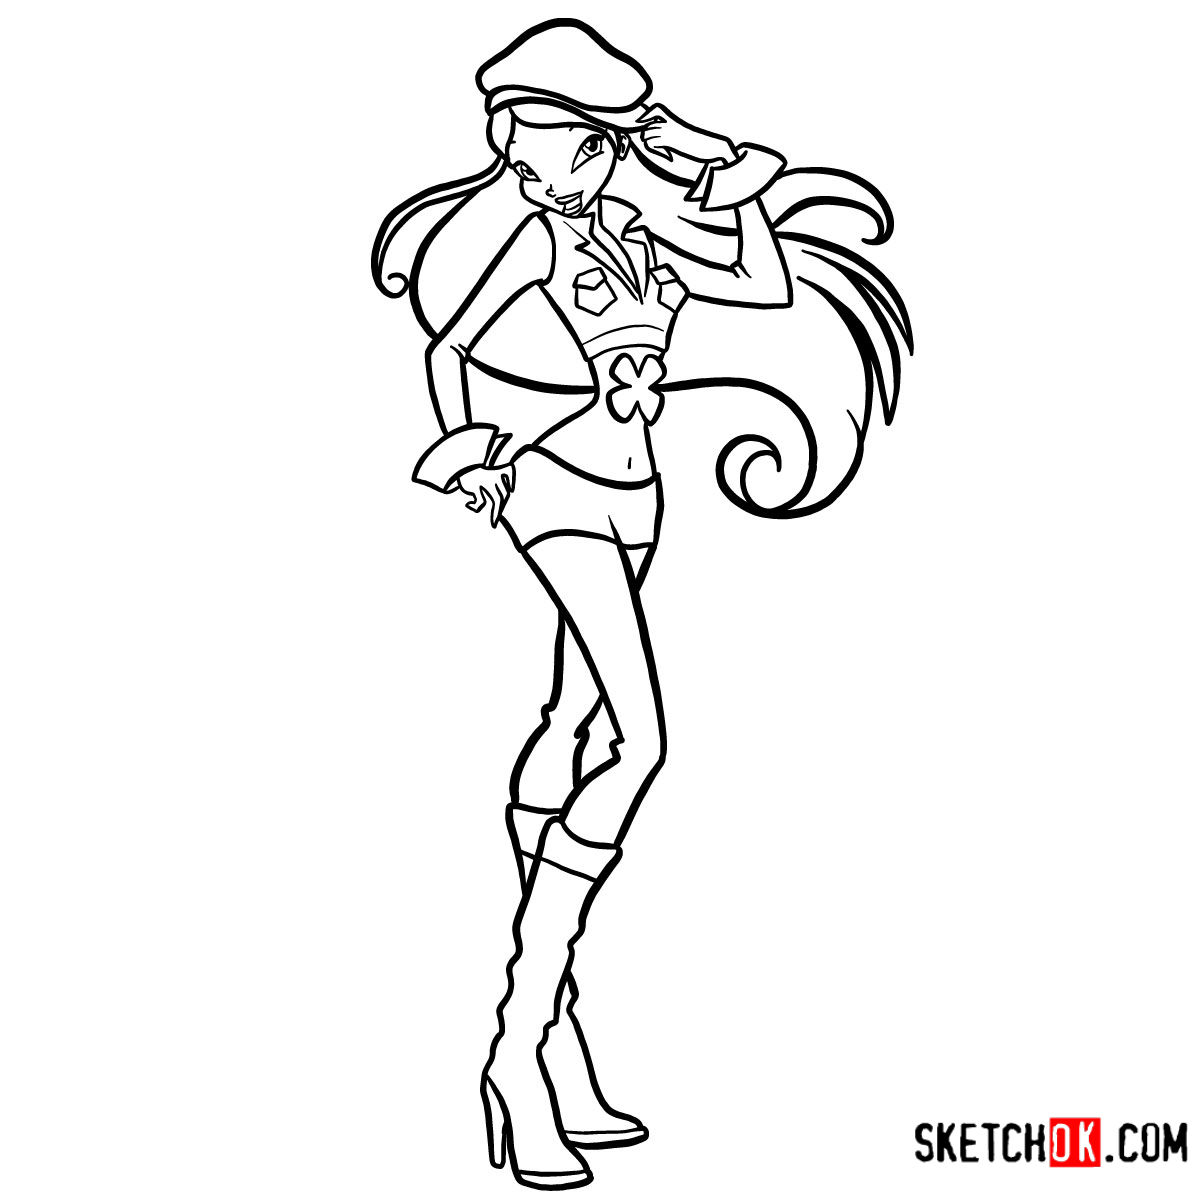 How to draw Flora from Winx Club series